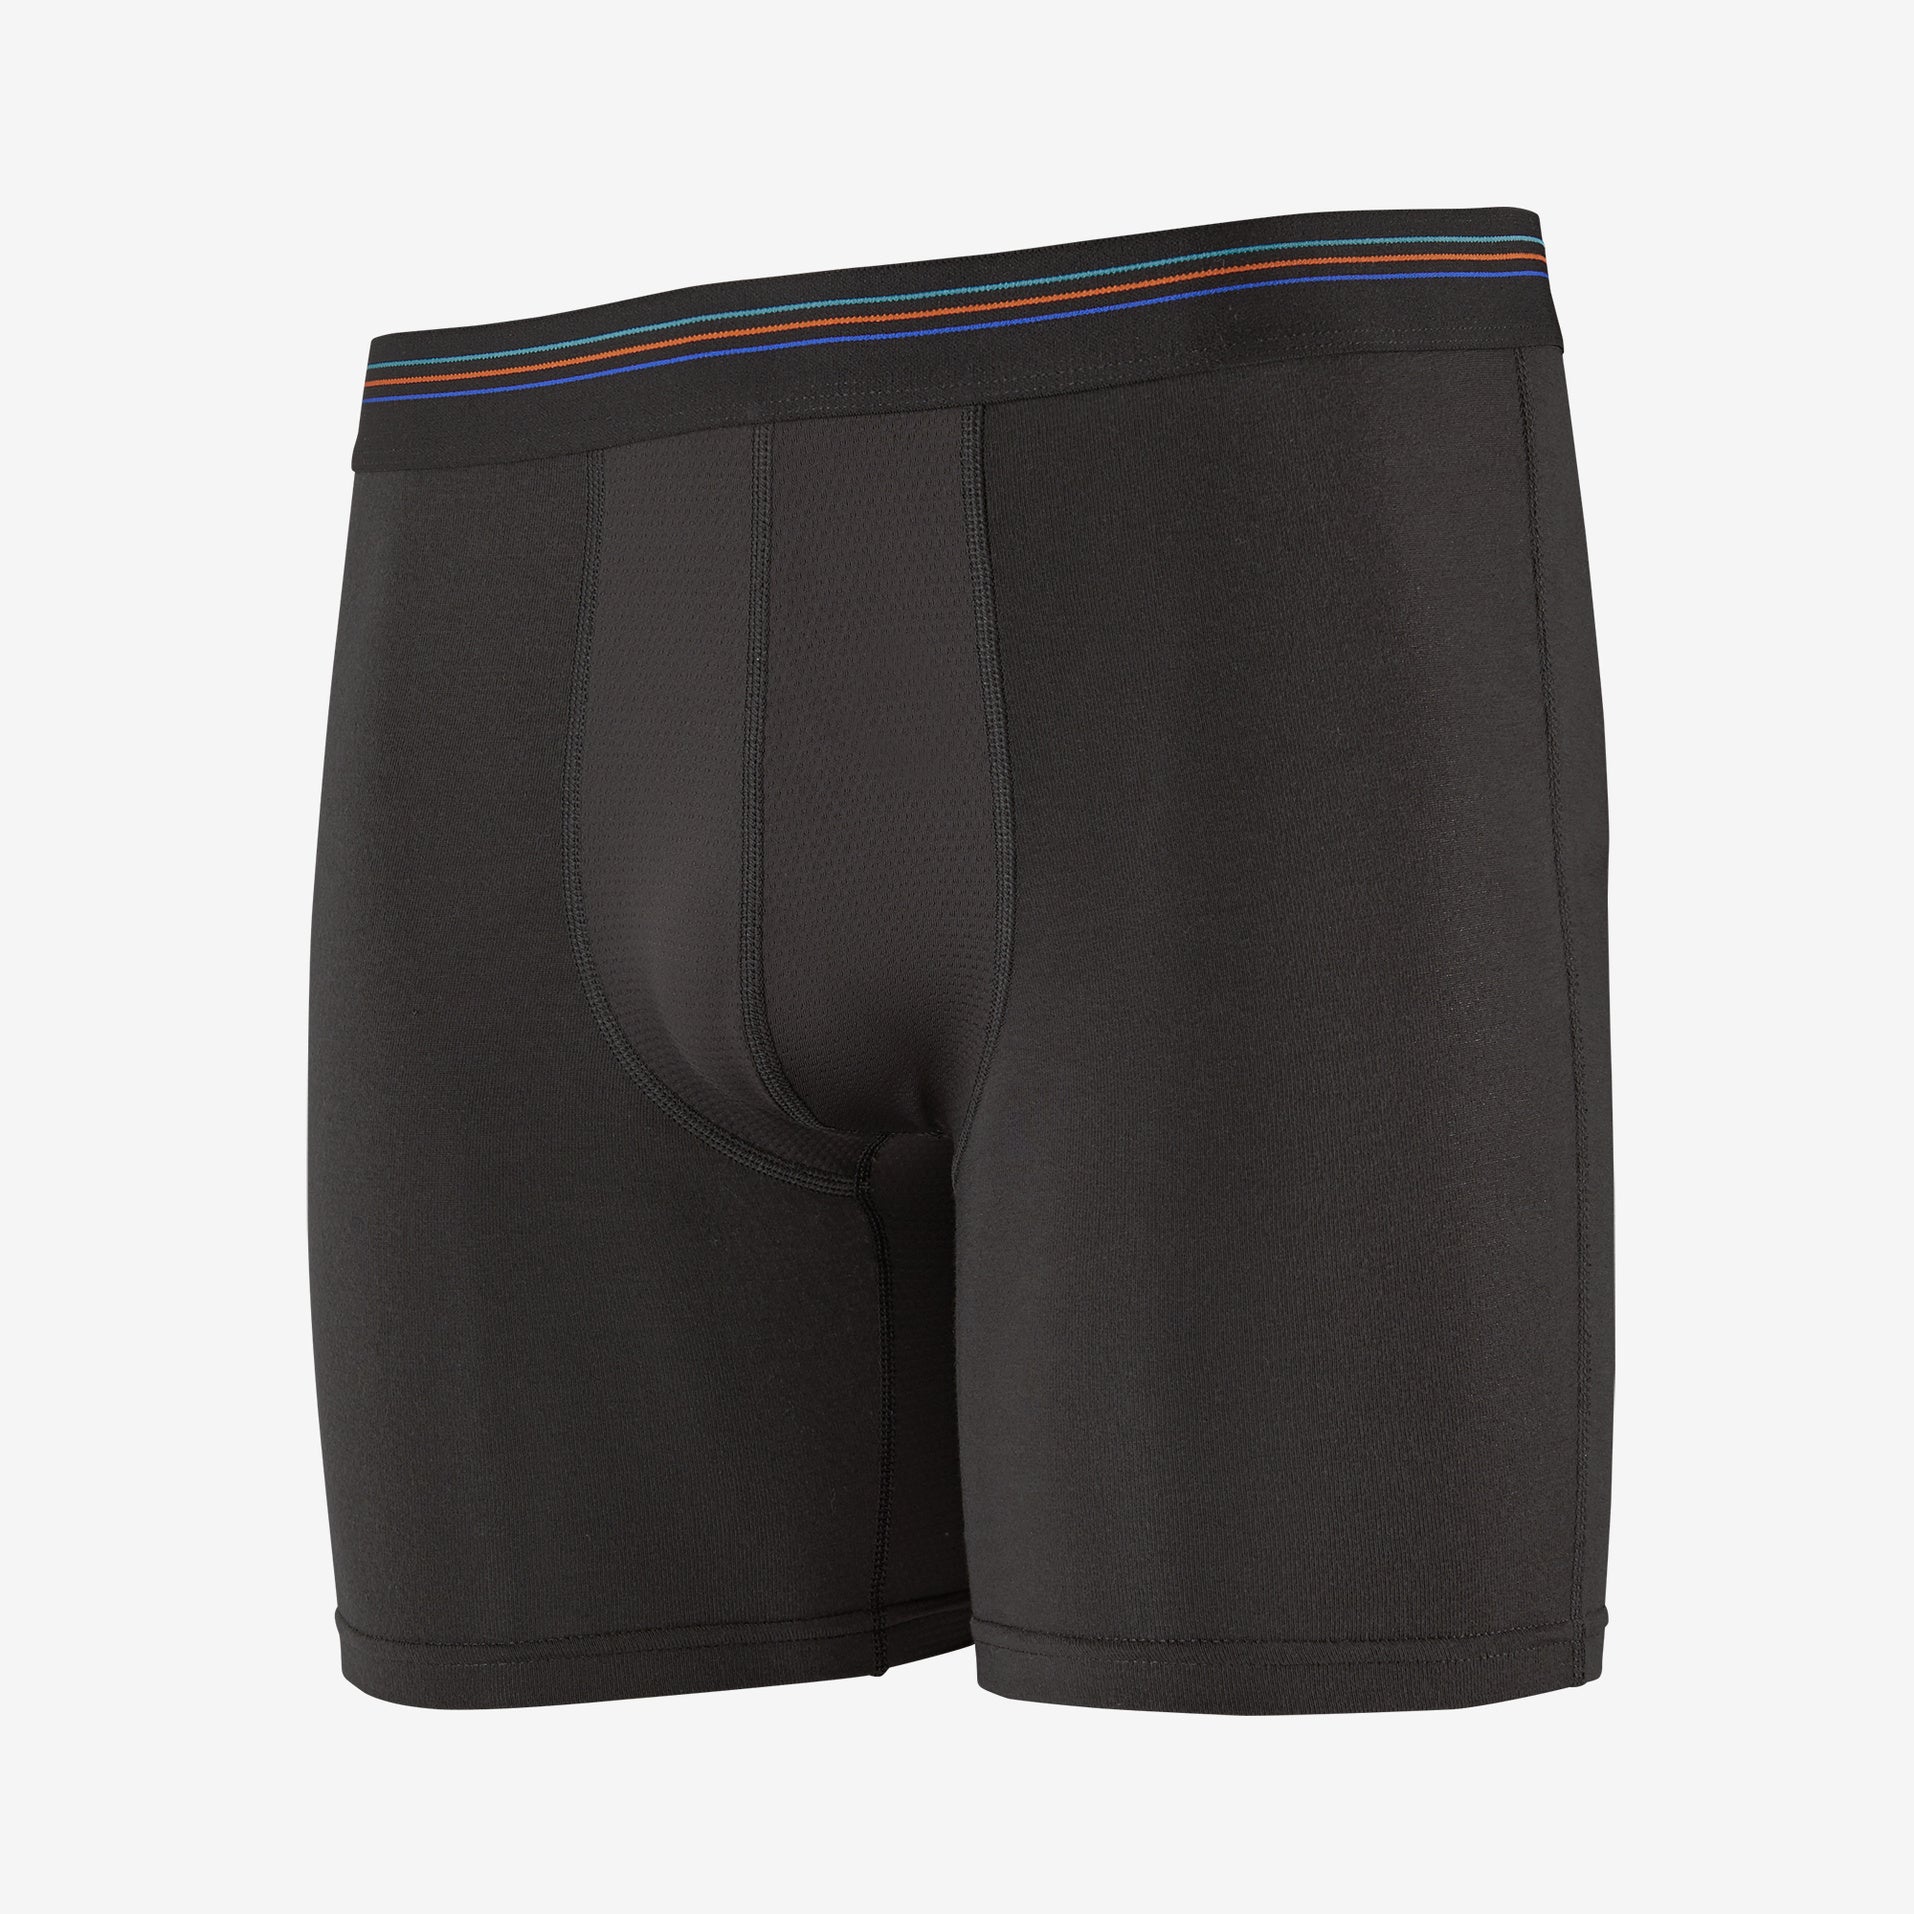 a photo of the patagonia mens essential a/c boxer briefs in the color black